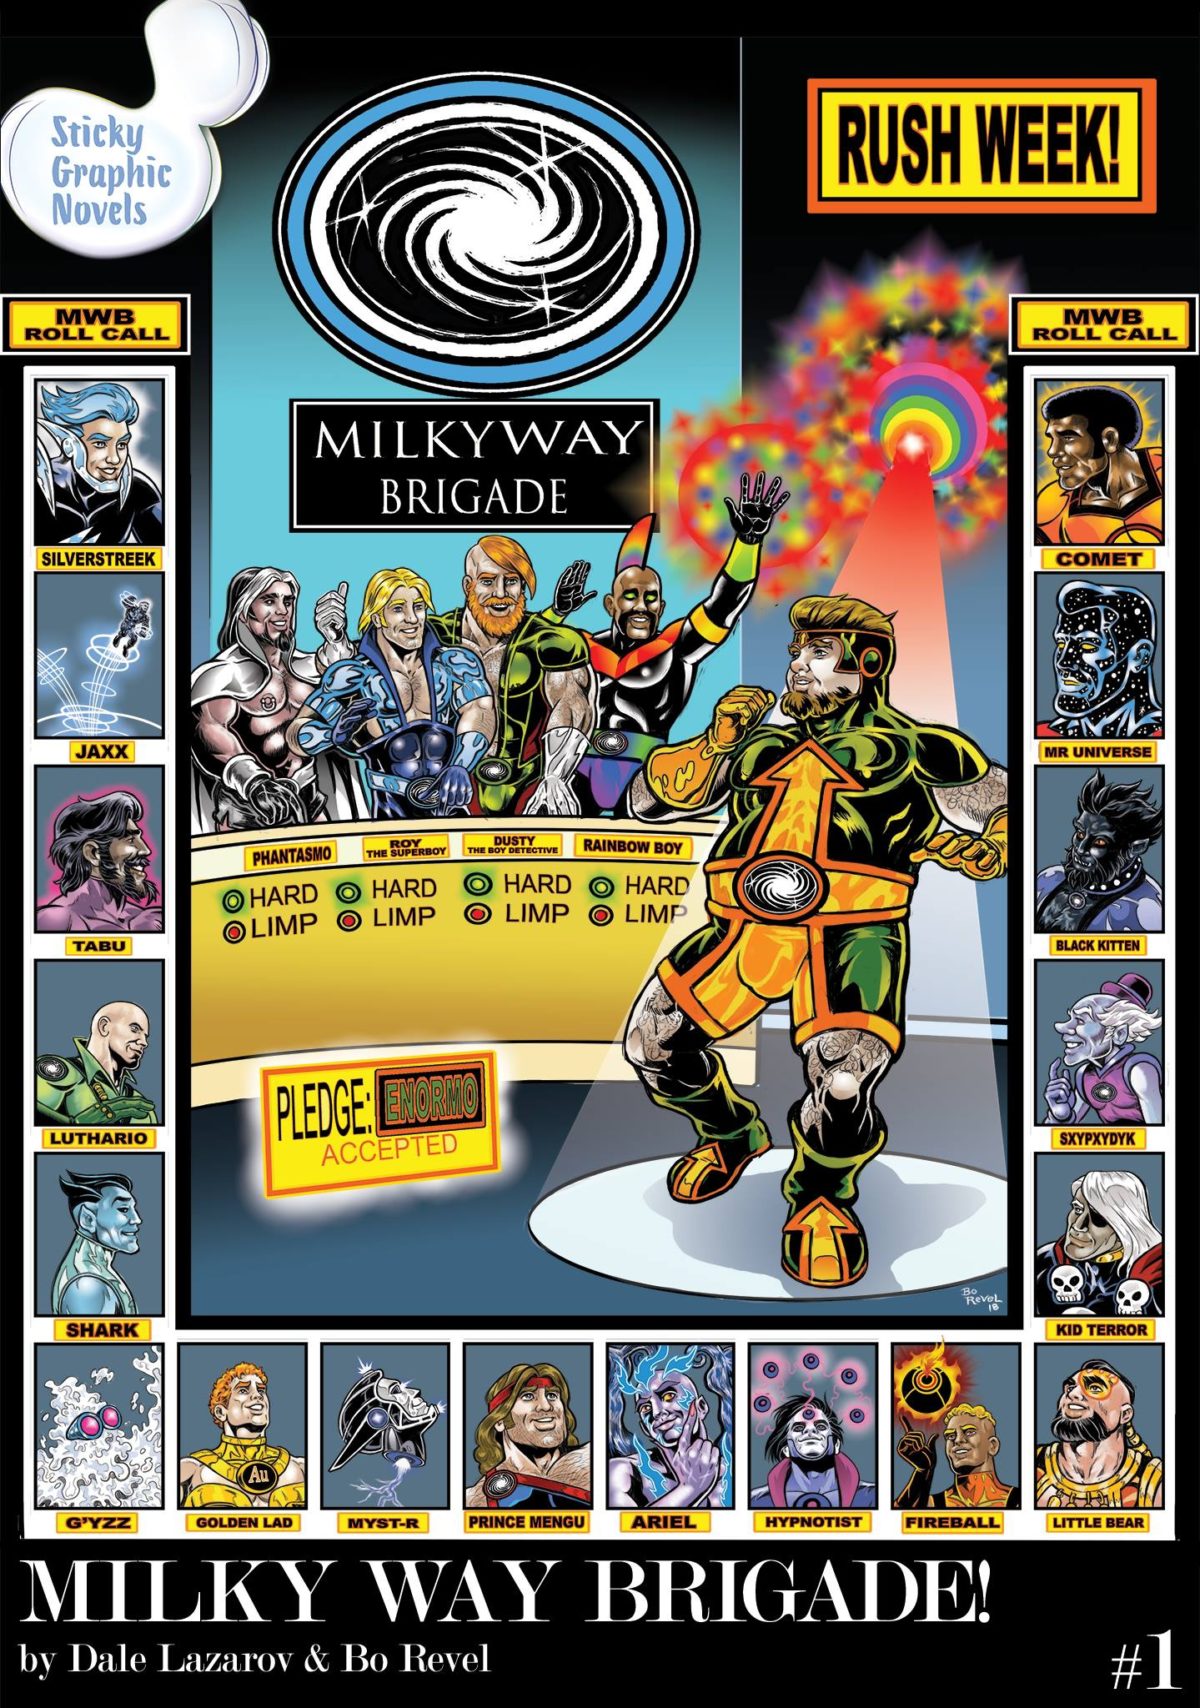 NOW ON SALE in digital format — MILKY WAY BRIGADE #1 for $7.20!